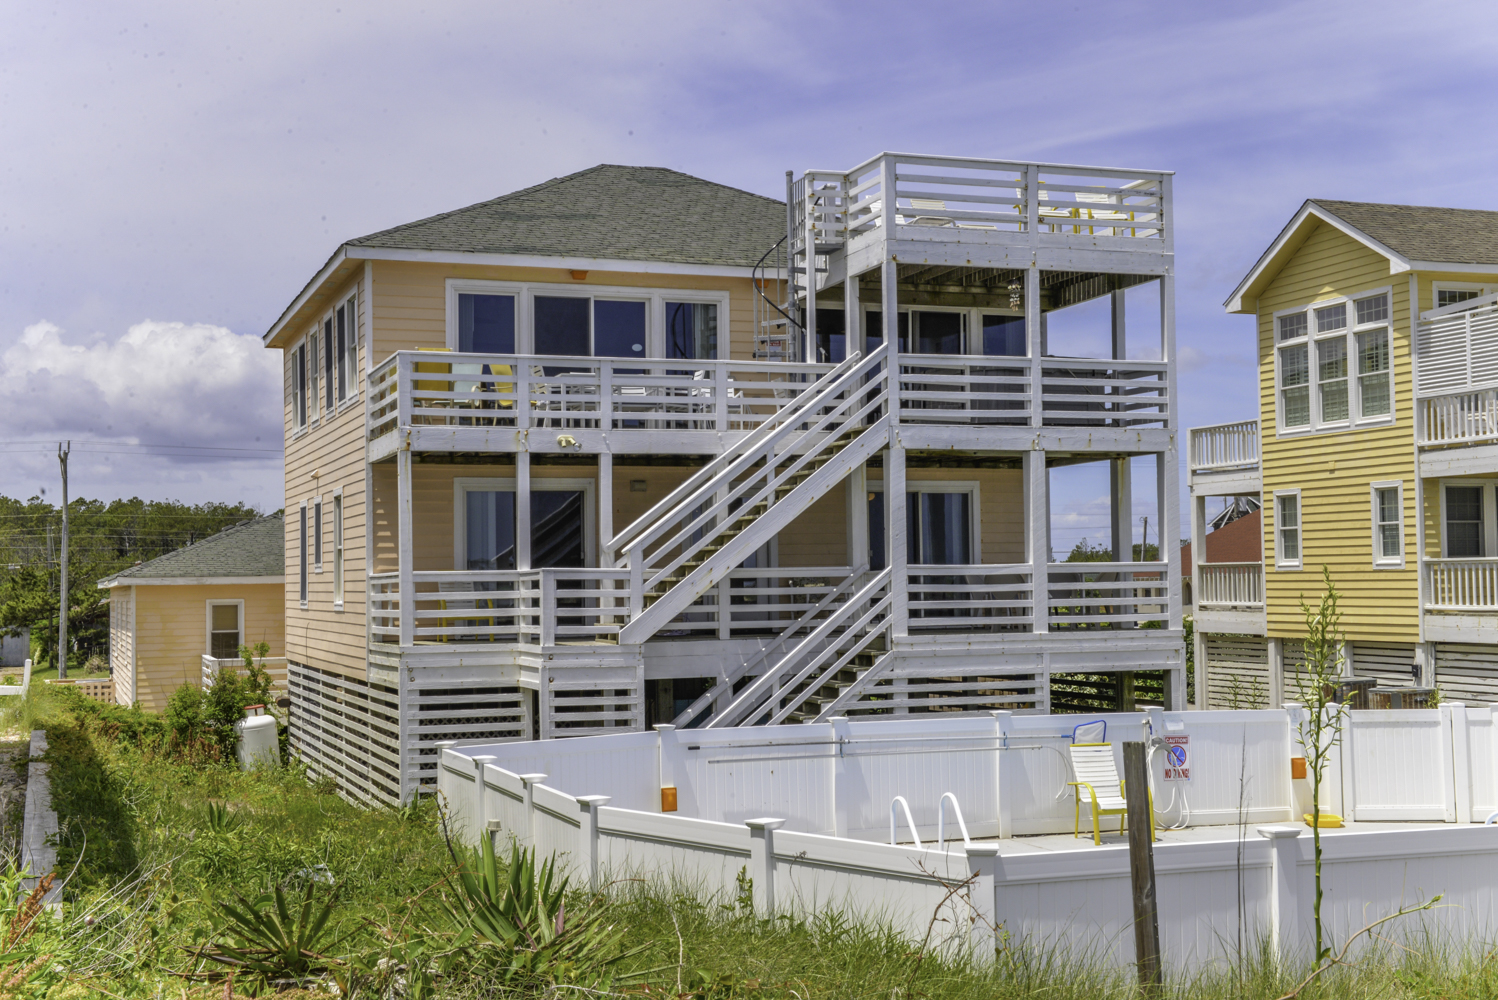 070 Good Karma Outer Banks Vacation Rental In Nags Head